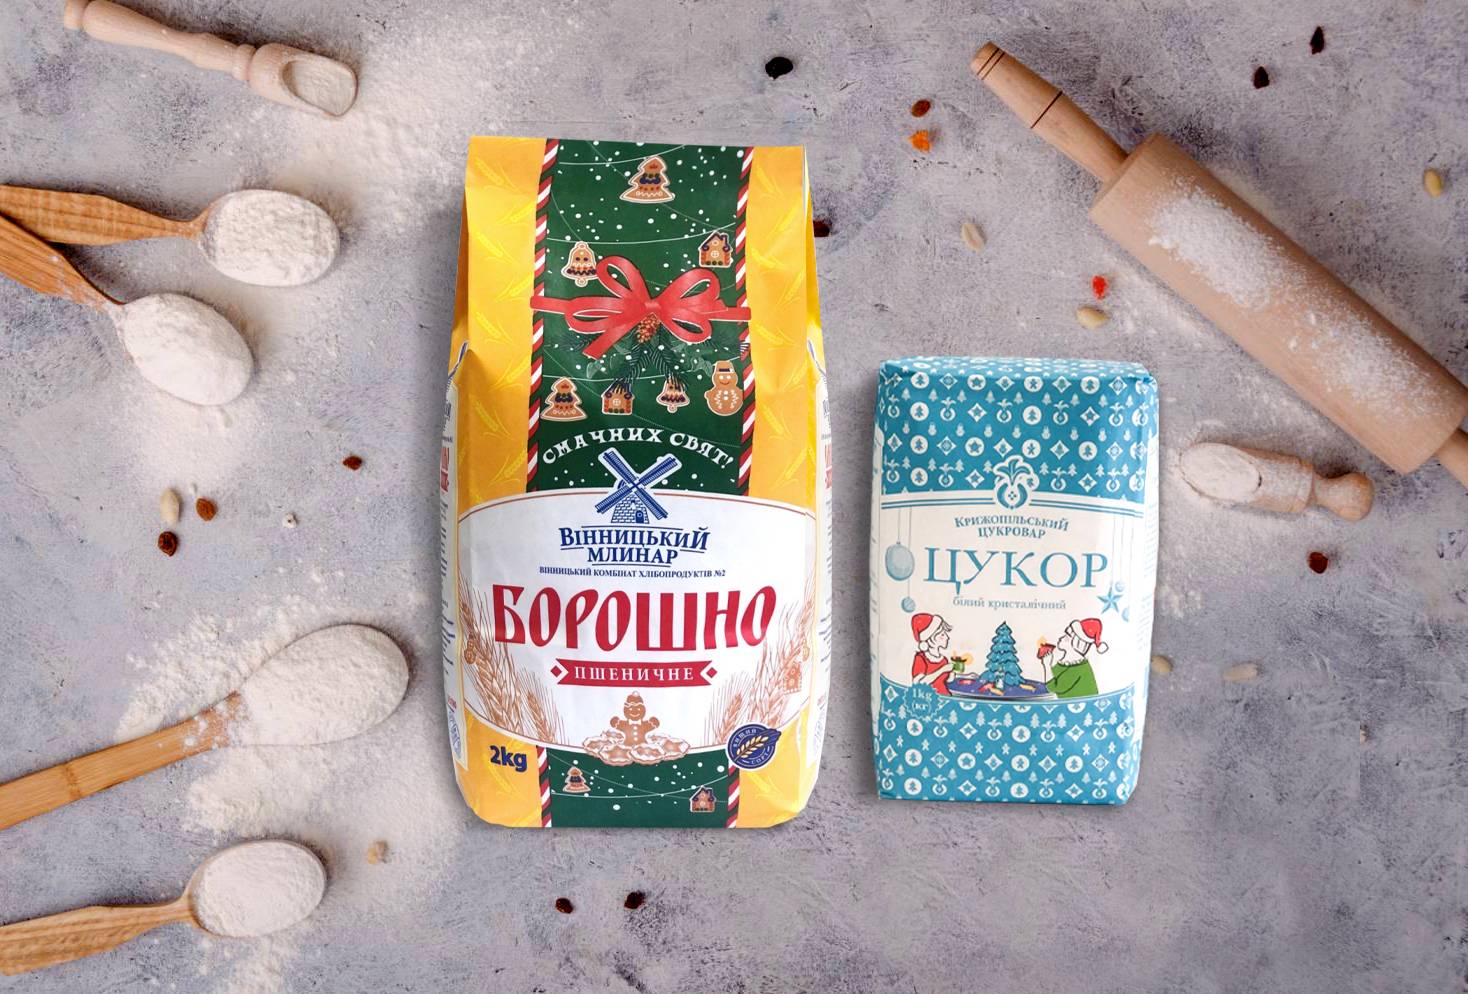 Vinnytsia bread factory #2 released a limited series of flour and sugar in holiday packaging